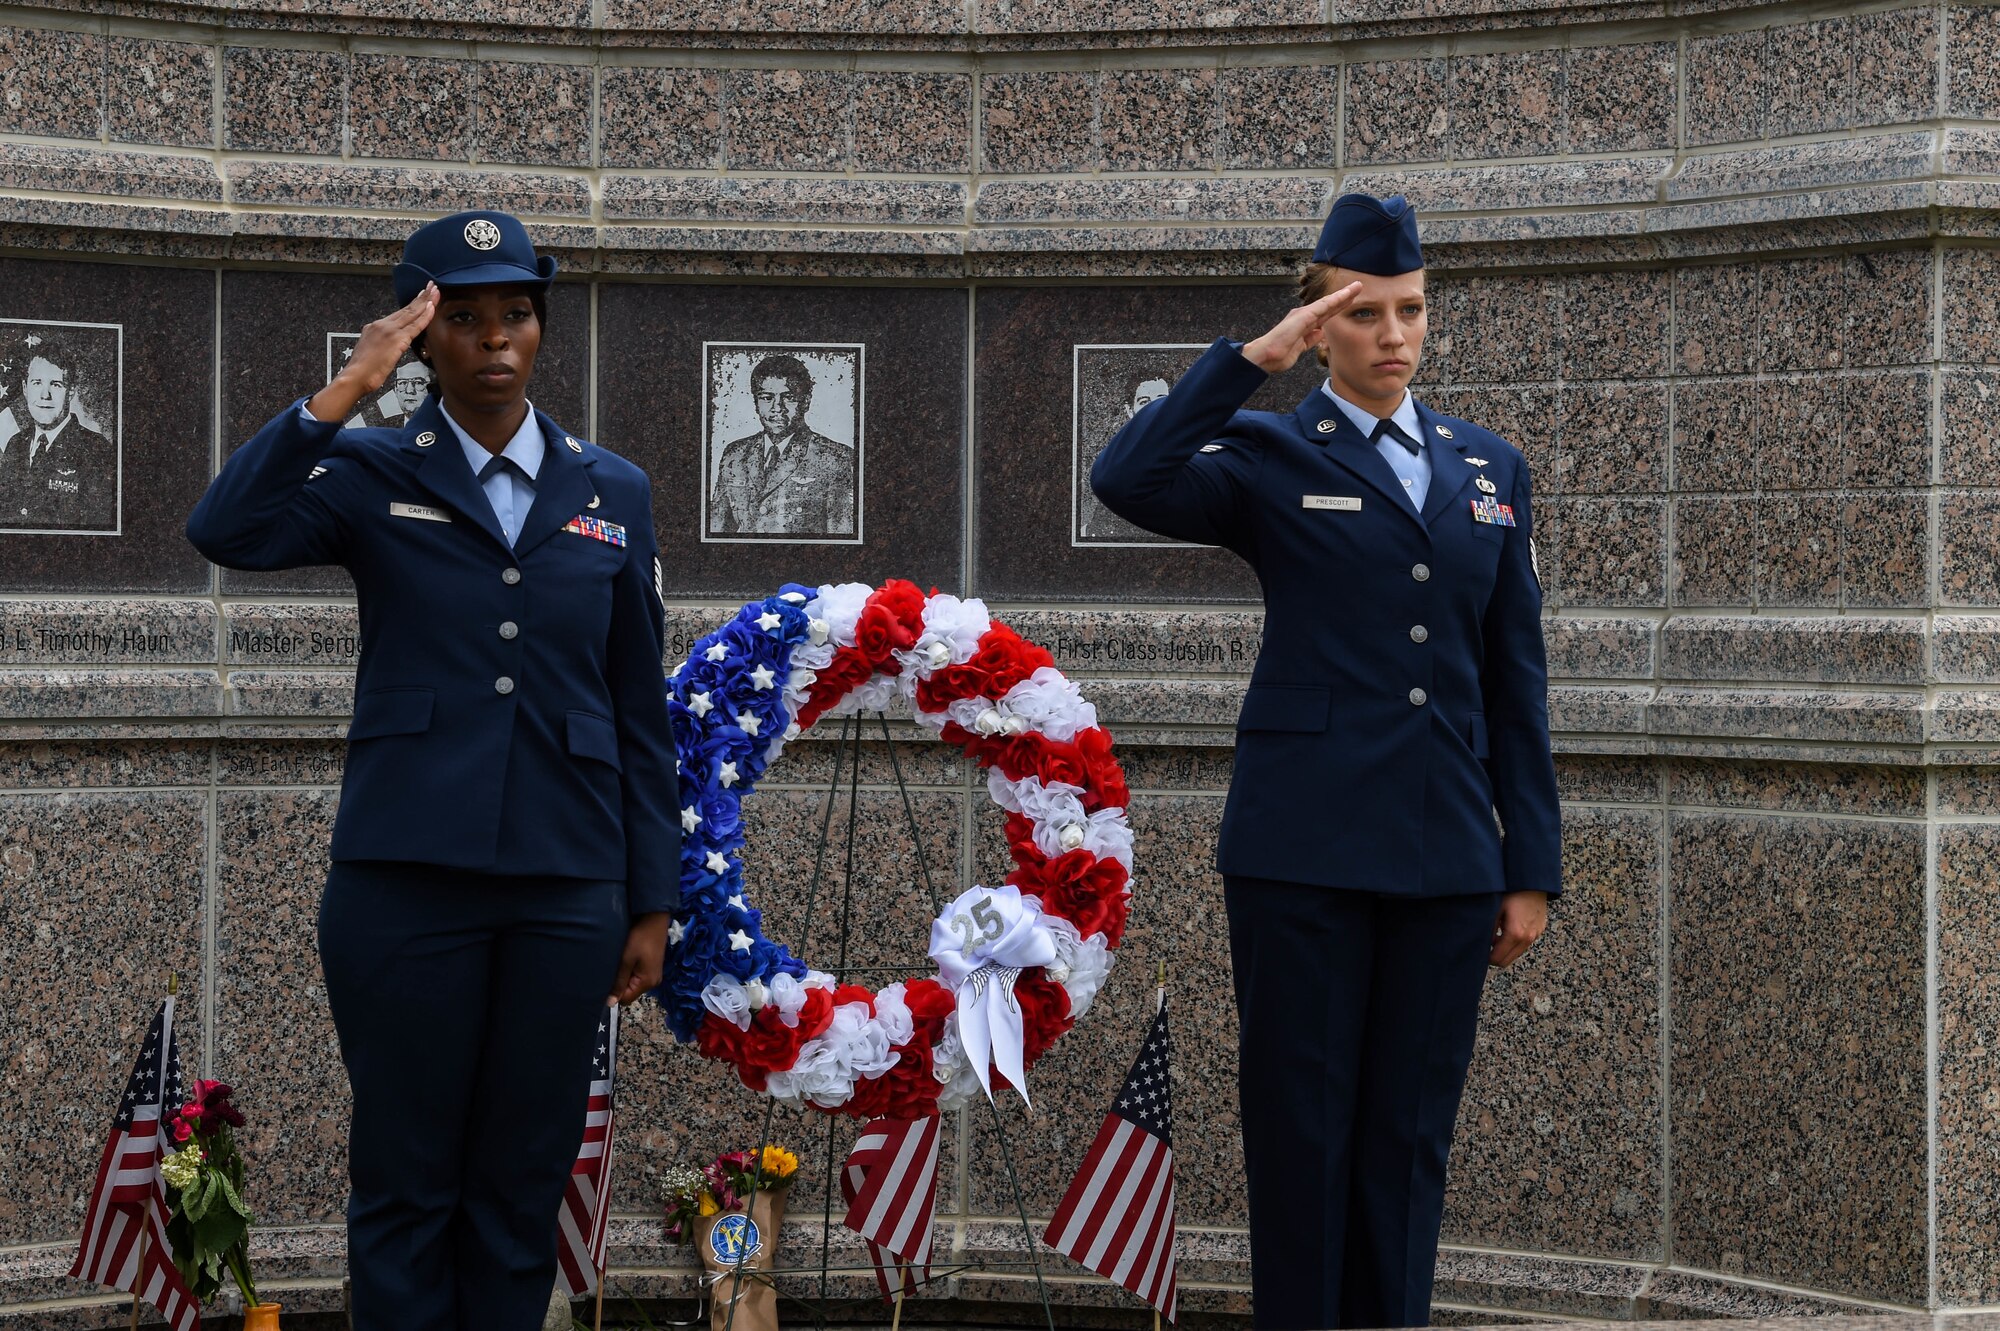 Two Airmen salute during a wreath-laying